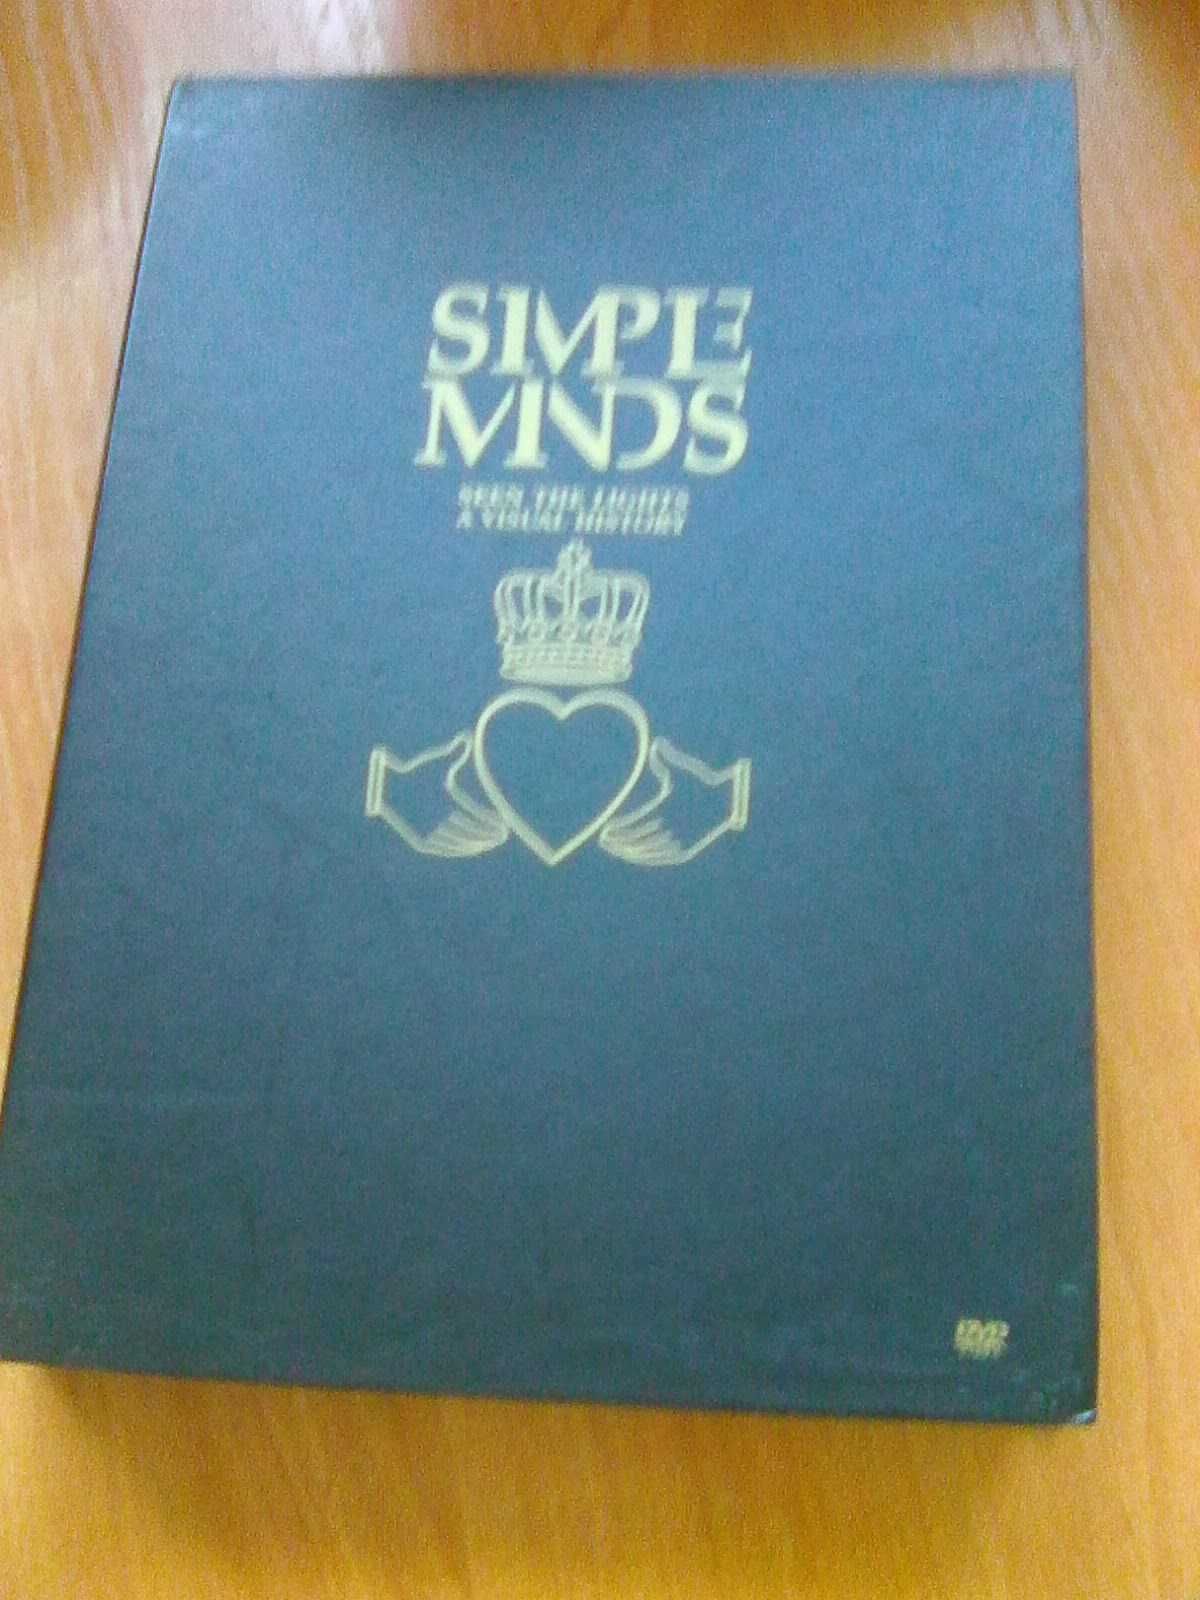 * Simple Minds: Seen the lights a visual history [2DVD]